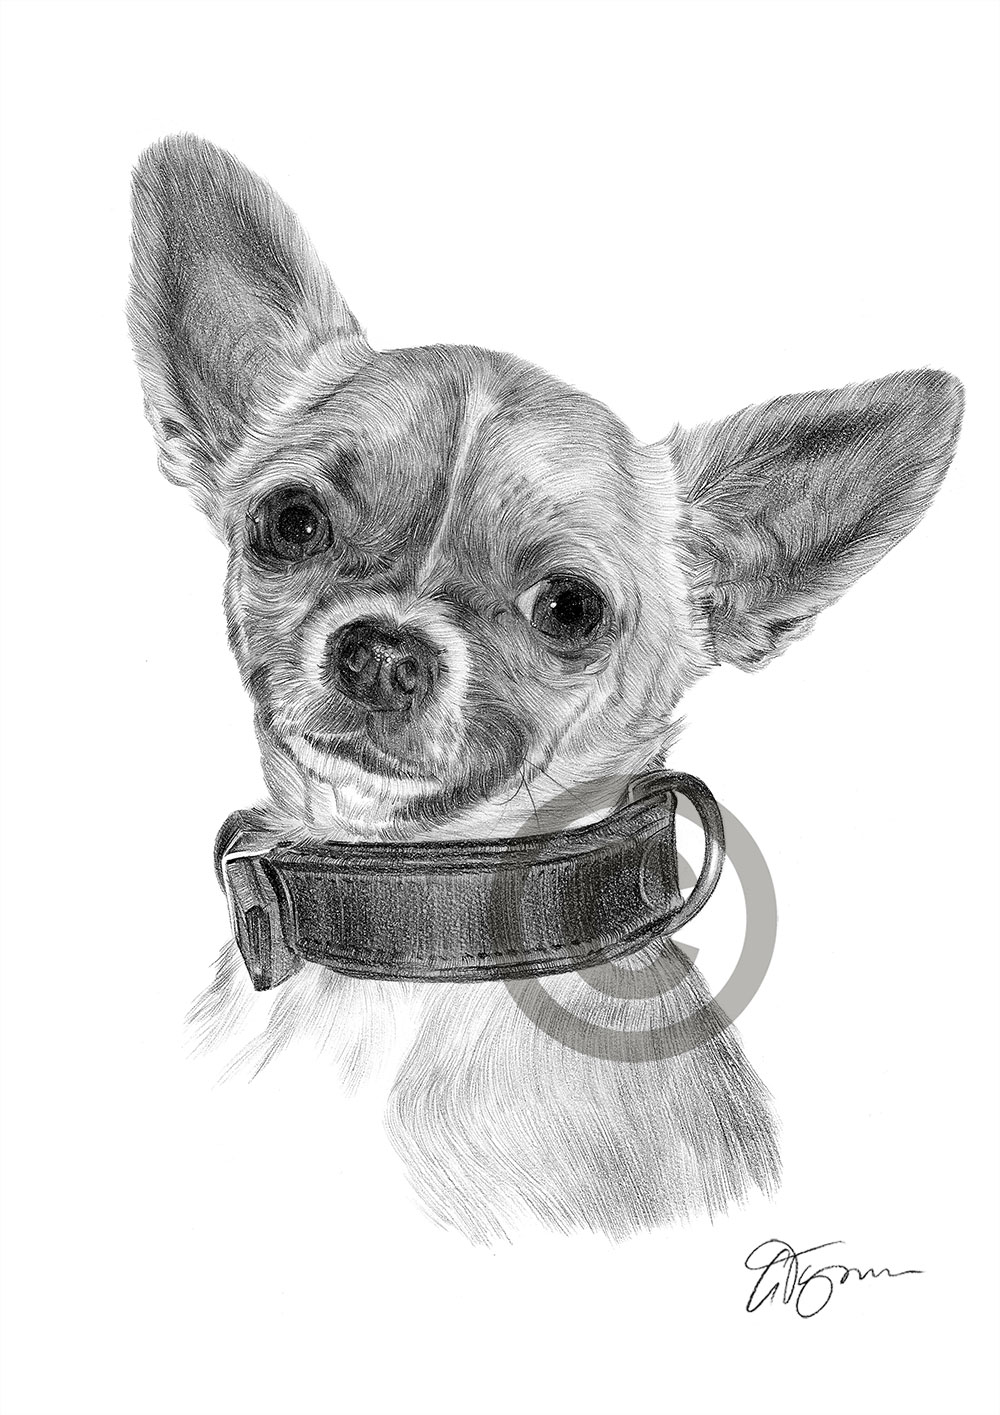 Pencil drawing of a Chihuahua by artist Gary Tymon